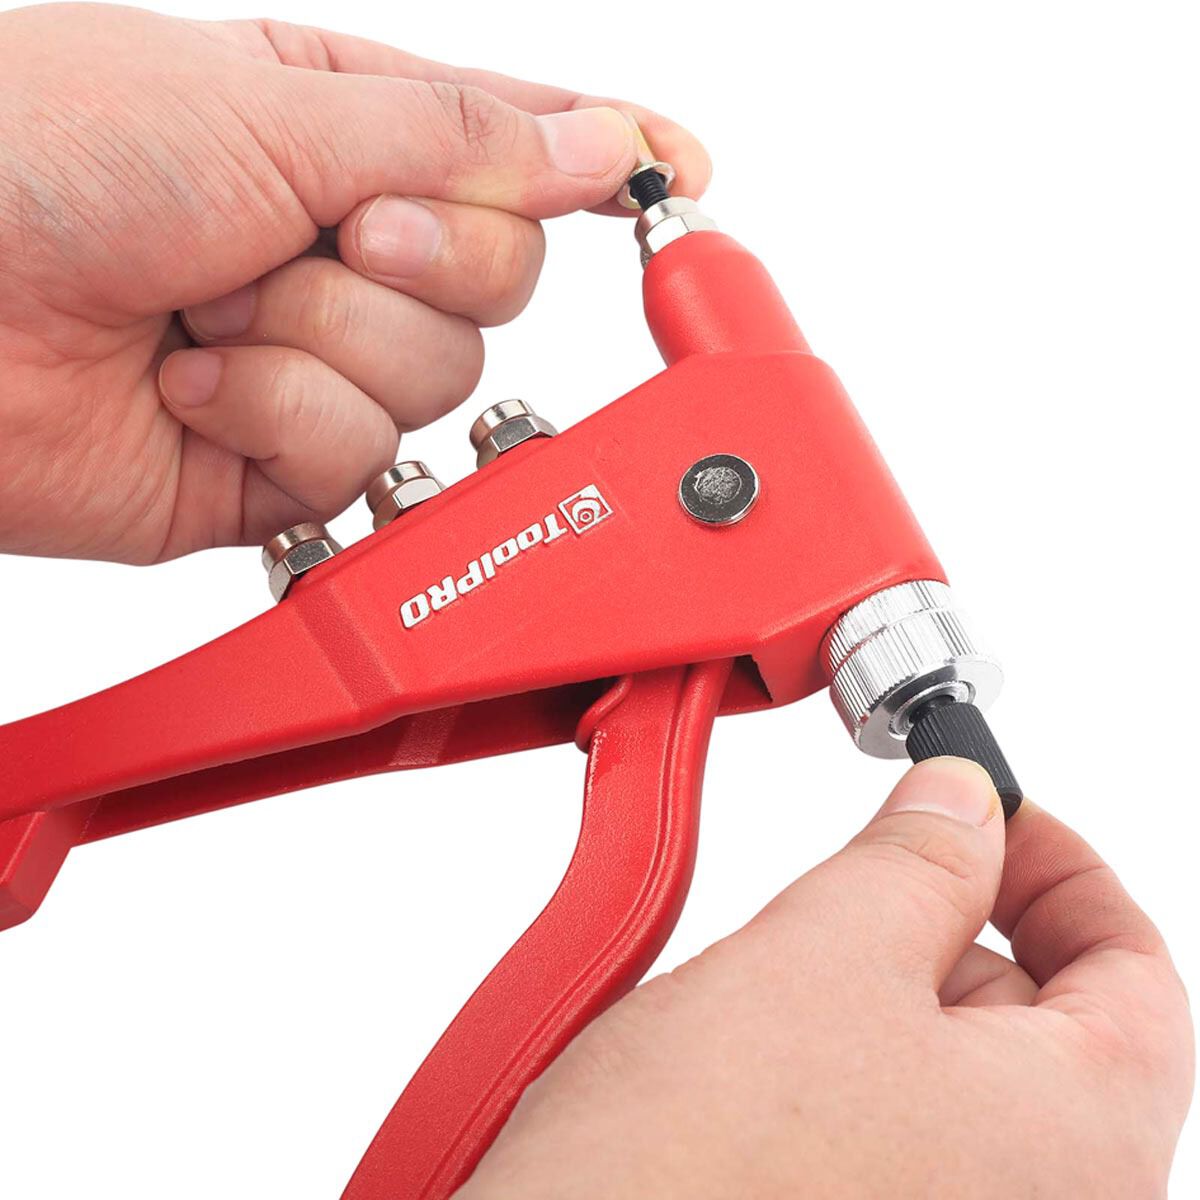 rivet removal tool for cars